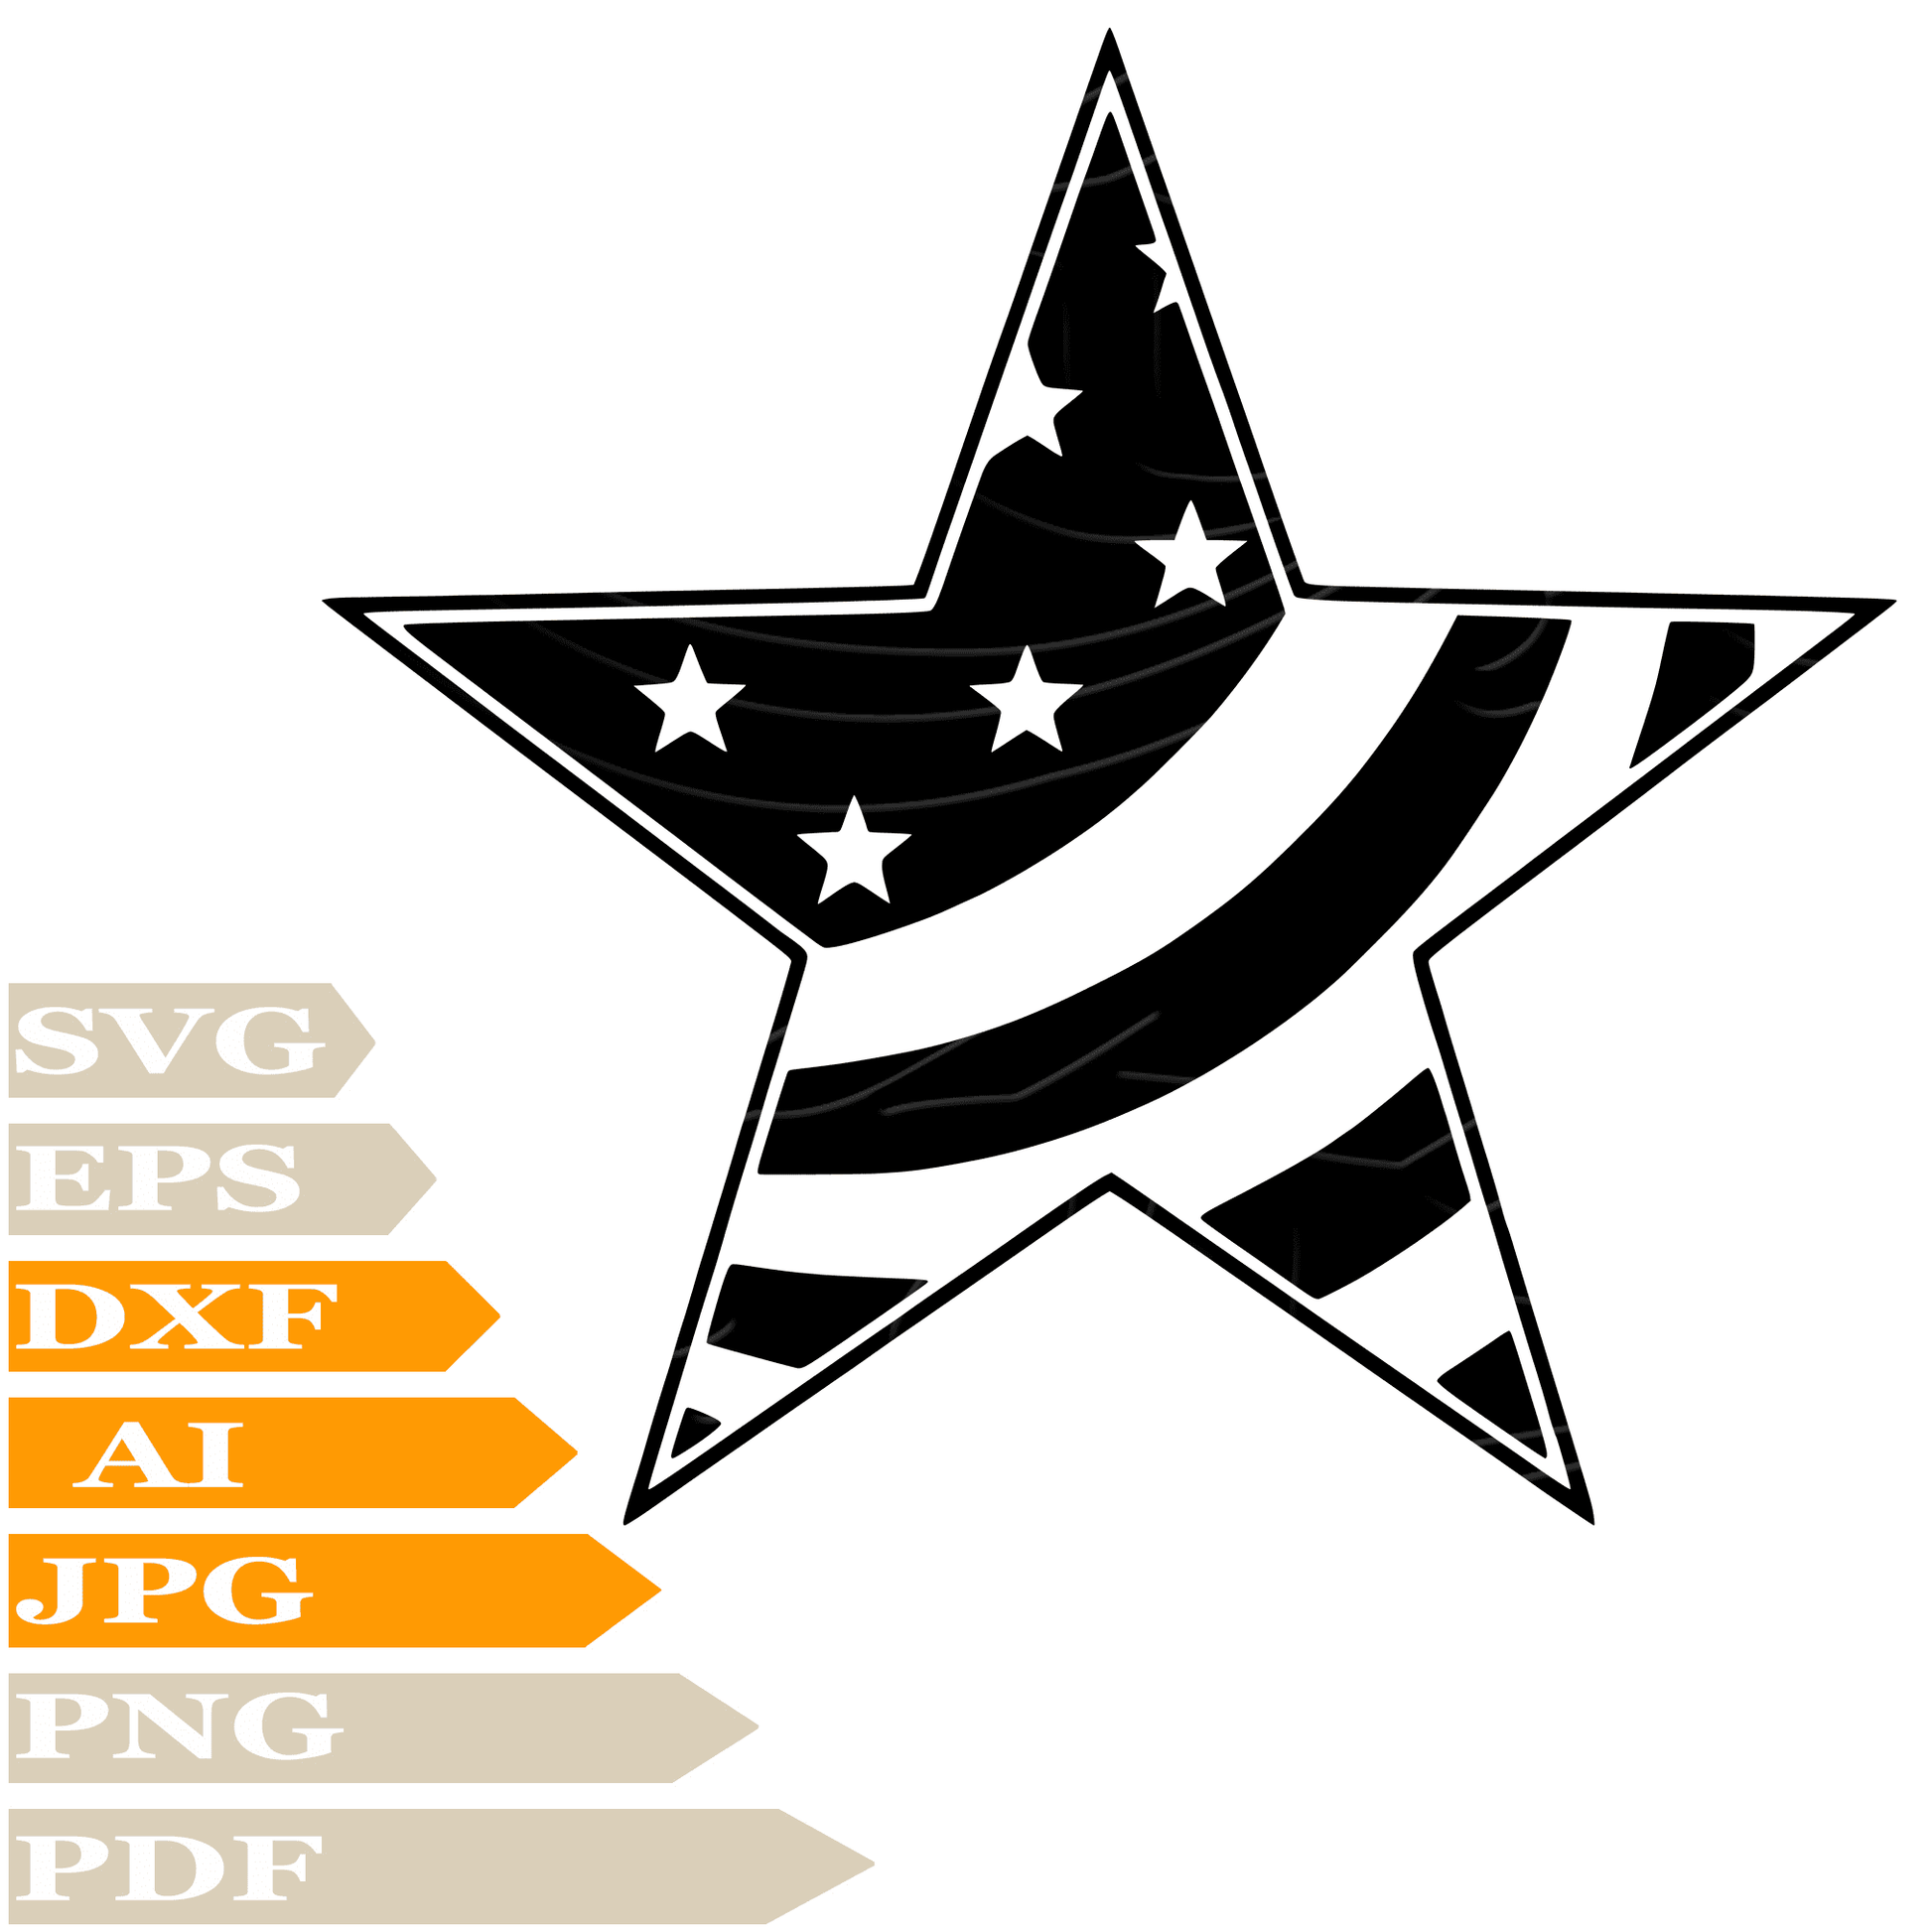 sofvintage-Star SVG, Star American Flag SVG File, USA Flag SVG Design, American Star Vector Cut File For Cricut, PNG, Clip Art, T–Shirt, Wall Sticker, Printable, Tattoo, Silhouette